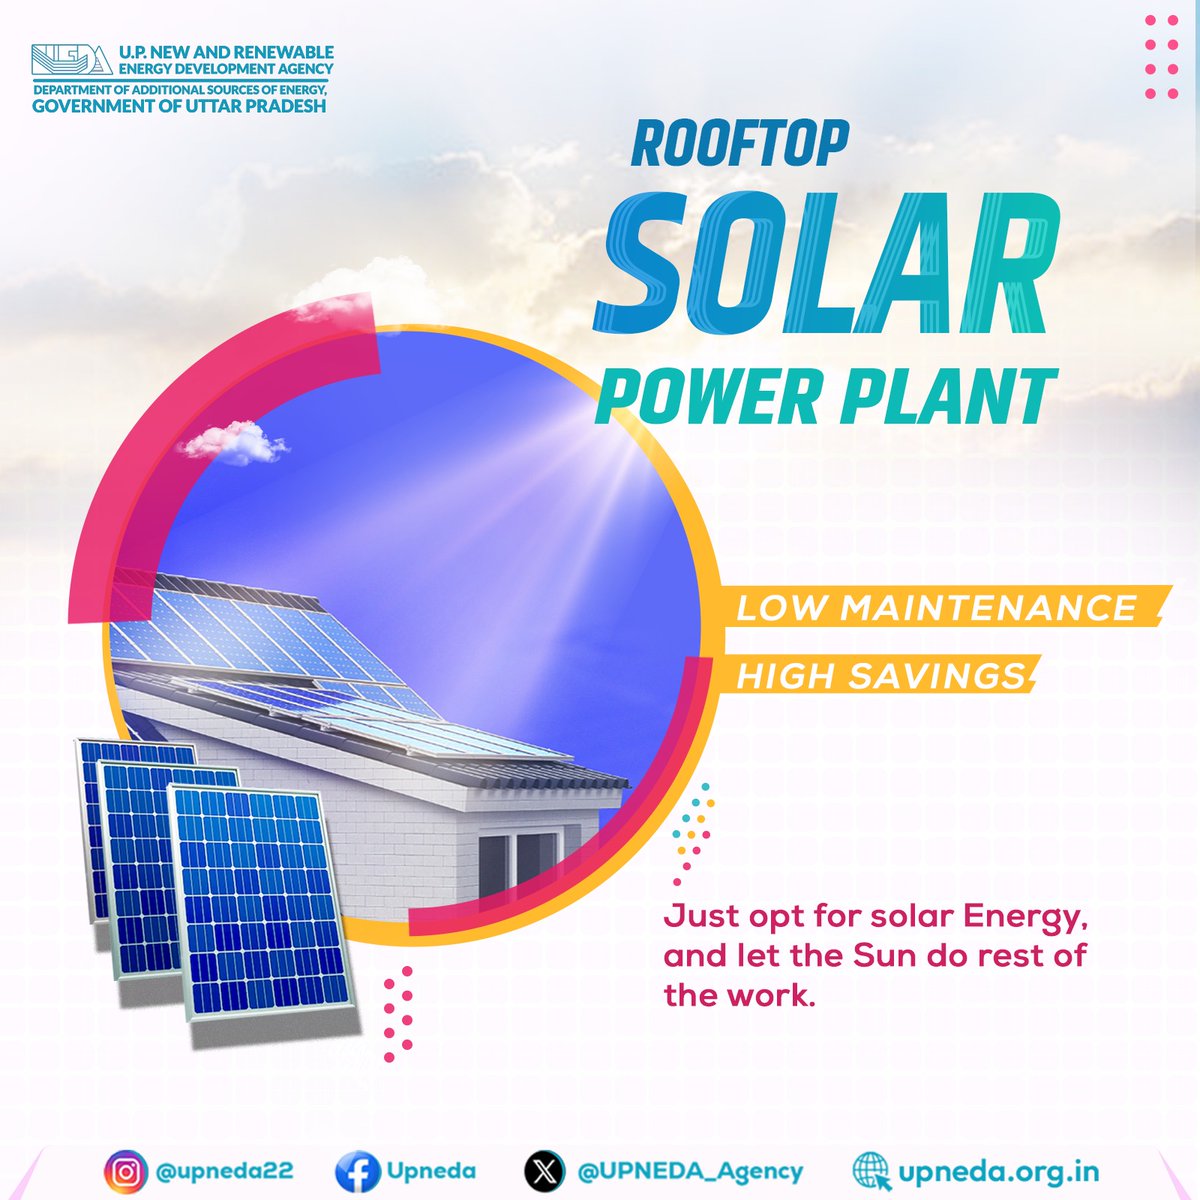 Transform your rooftop into a powerhouse of savings with solar energy! Low maintenance, high savings – harness the sun's unlimited power and watch your energy bills shrink. 

#SolarPower #SolarEnergy #RenewableEnergy 
#GoSolar #UPNEDA #upneda_agency
@CMOfficeUP
@aksharmaBharat